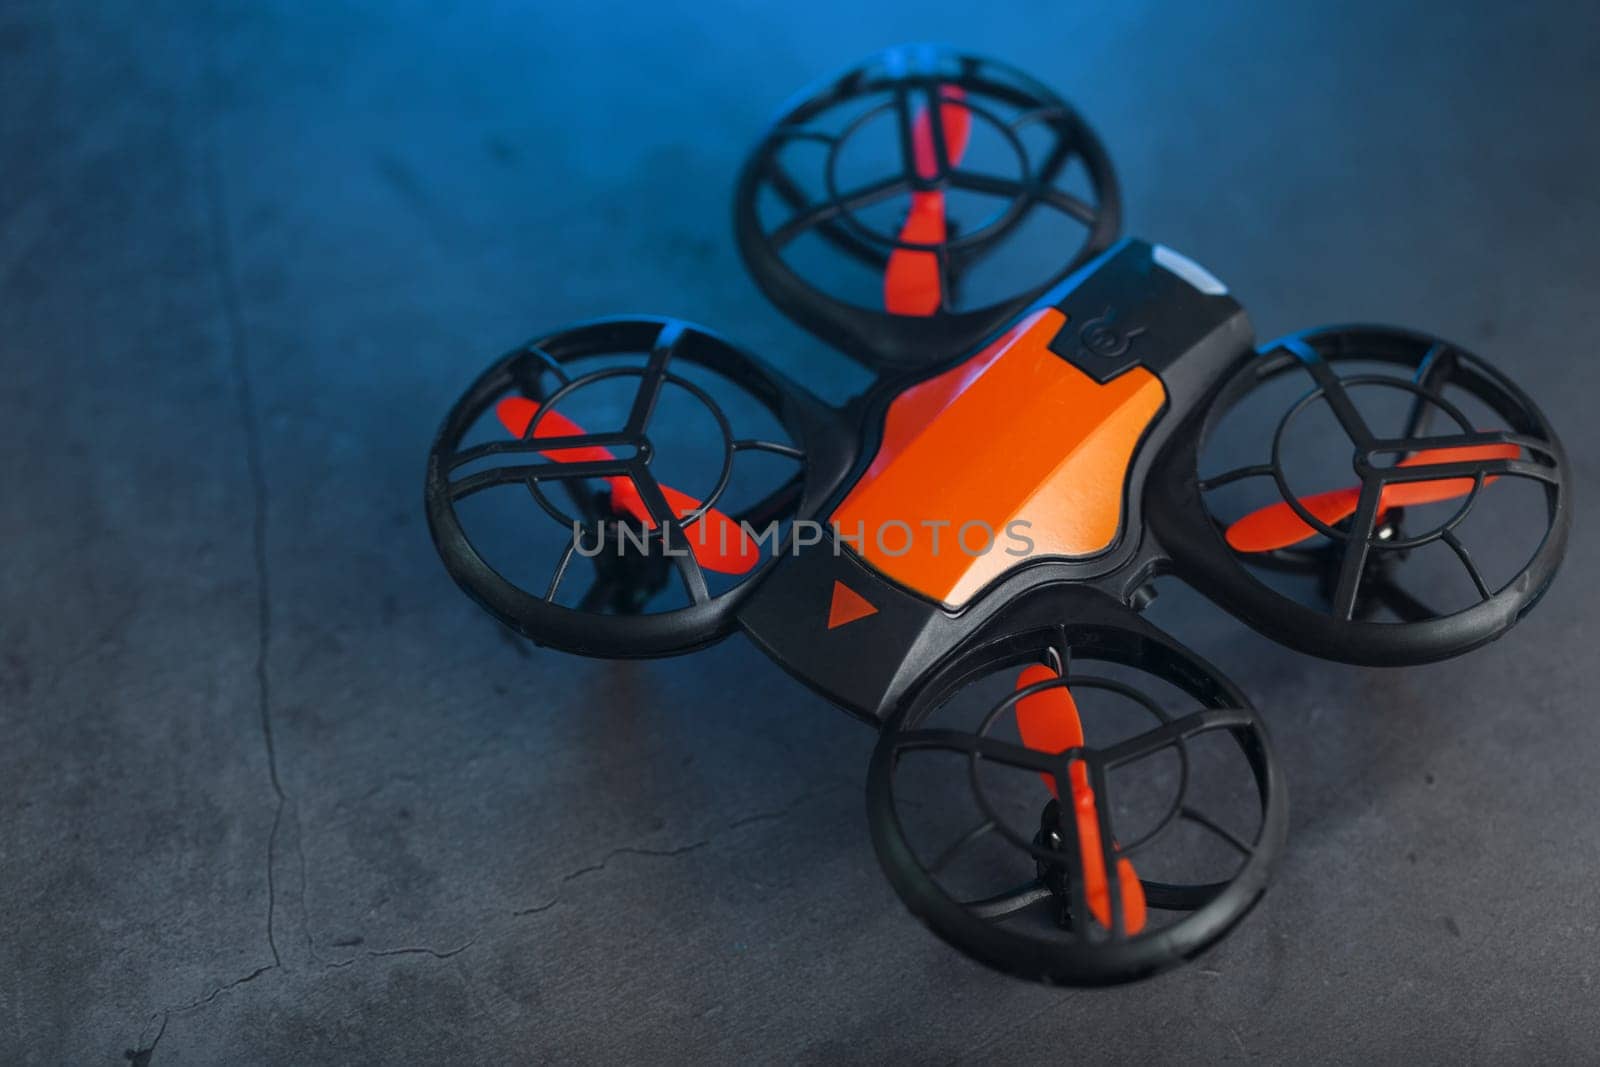 A reconnaissance quadcopter drone with an orange body and blue LED backlight on a dark background